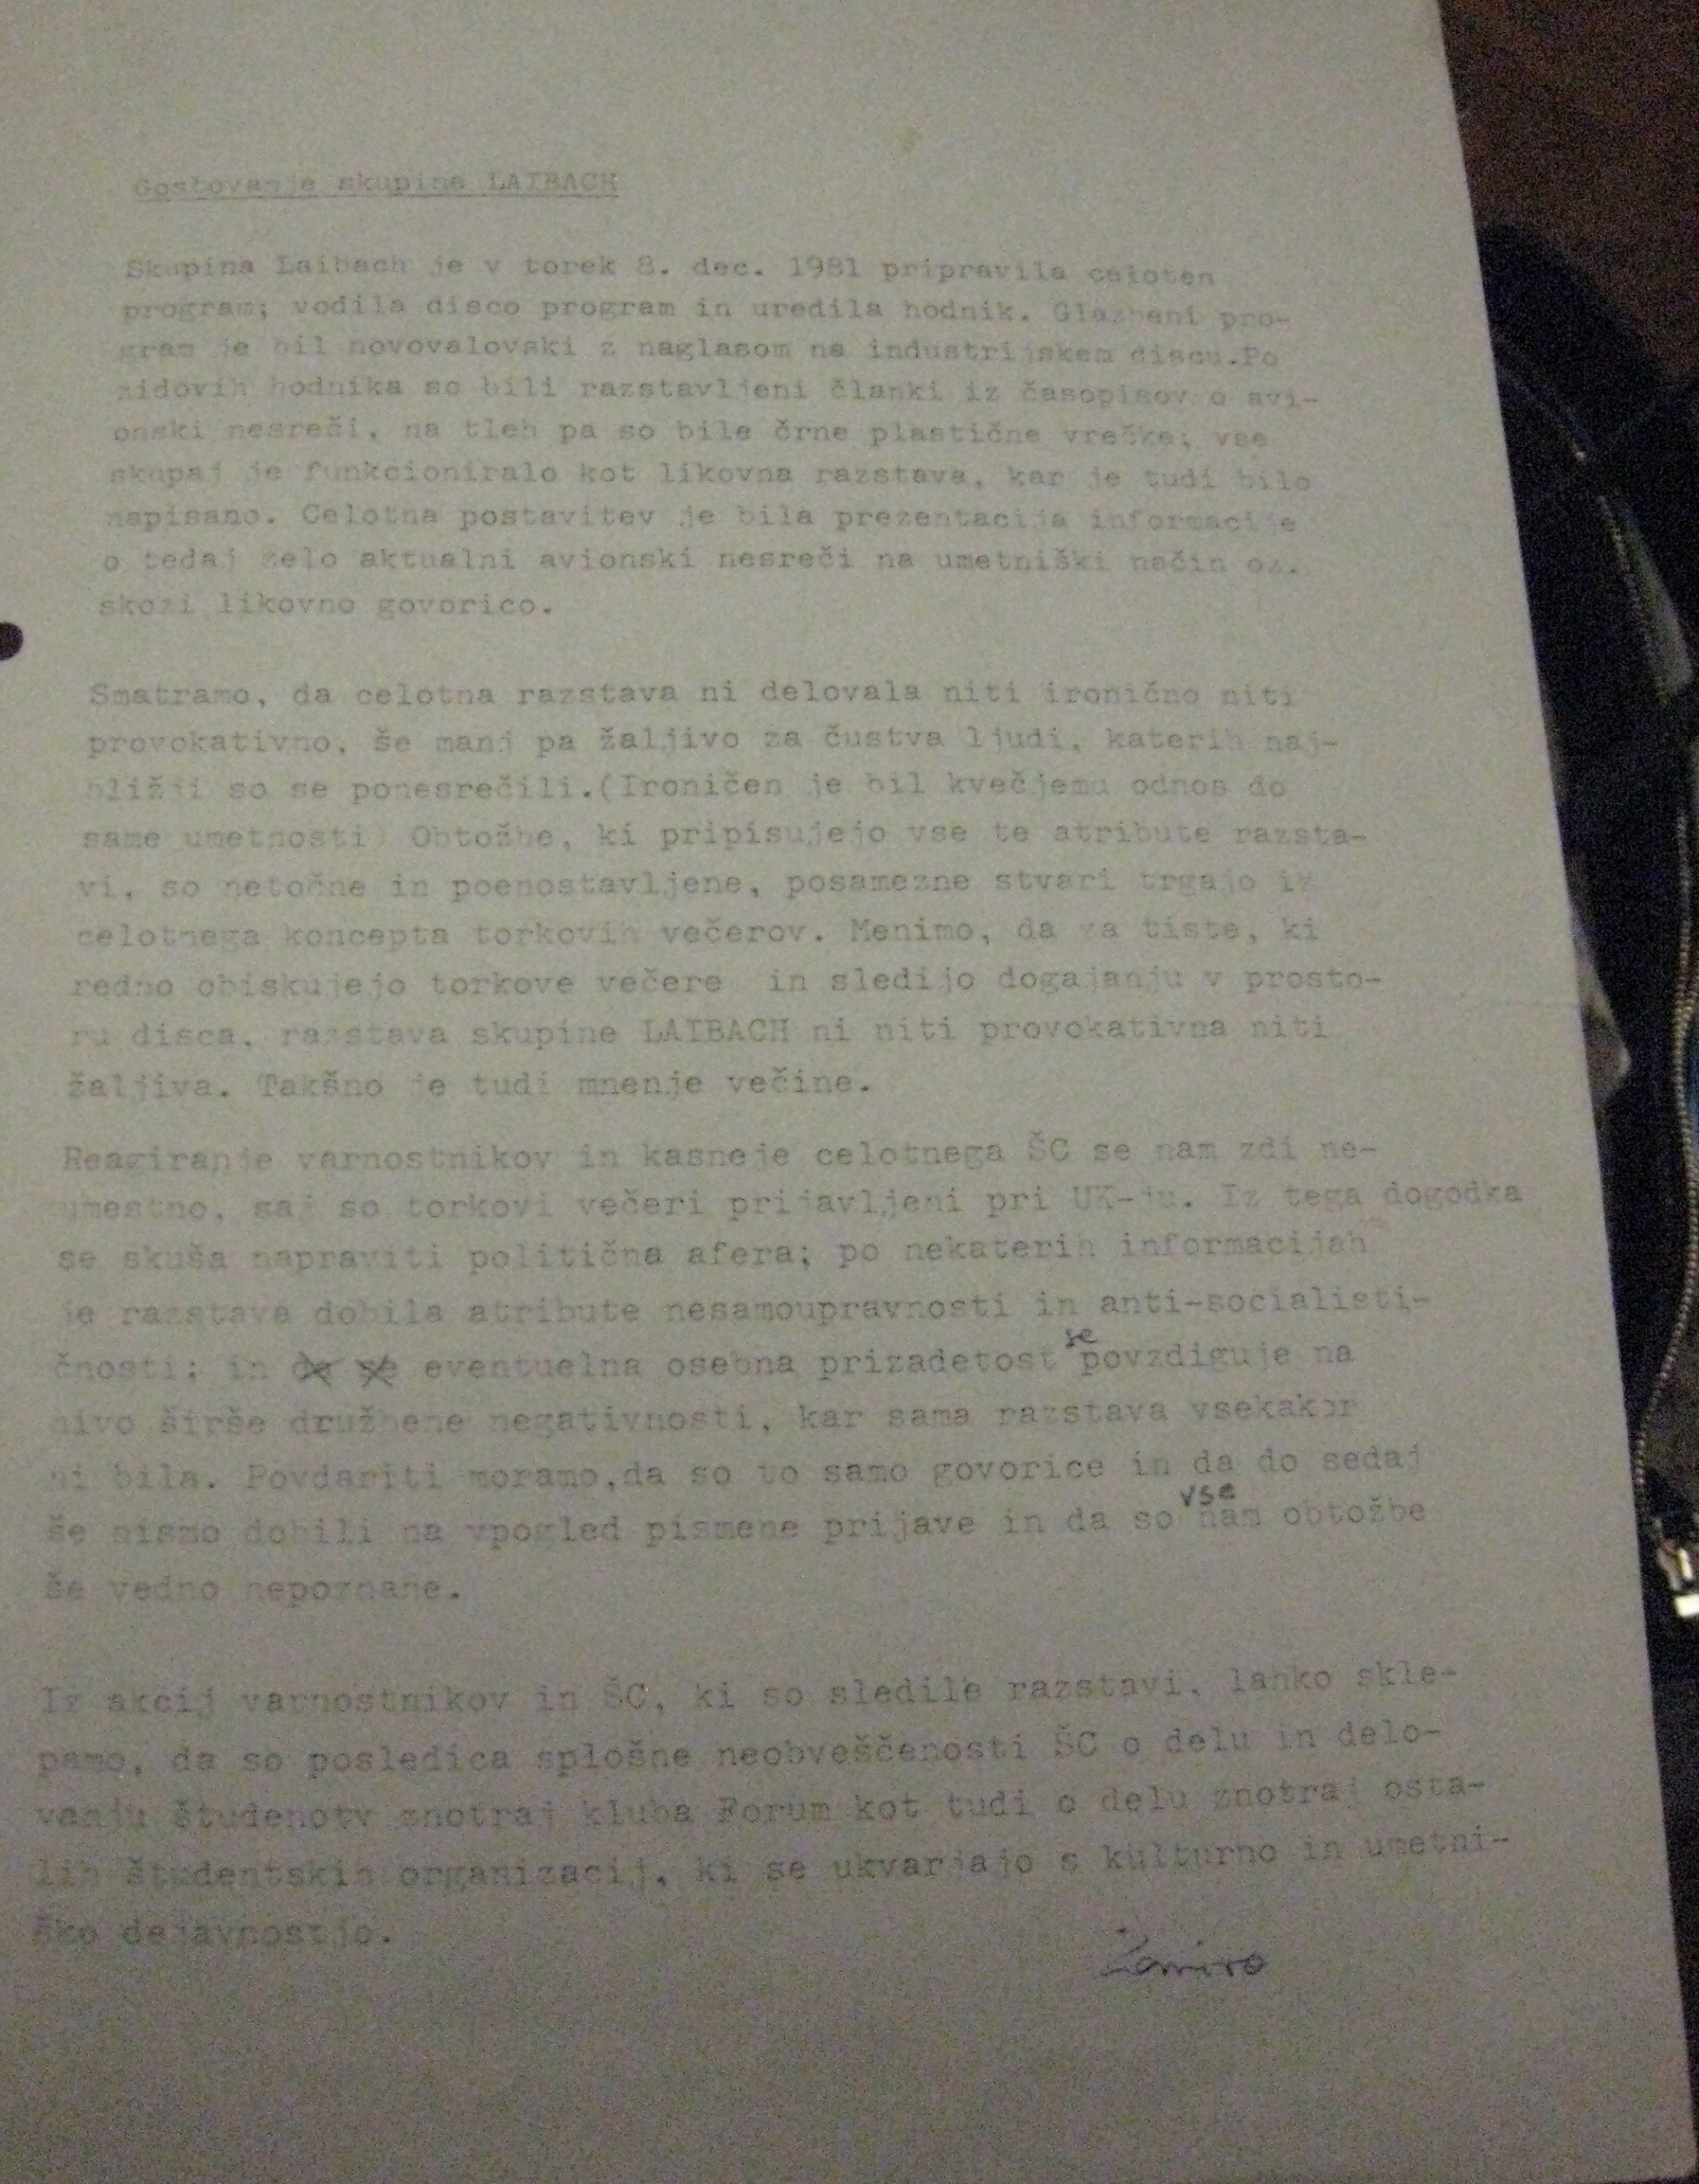 Document: Report on Hosting of Group Laibach at FV Disco in december 1981 from The bundle with The FV Group archive materials at MGLC. The text describes the objections of security guards that the show was antisocialist and againts self-management. (2017-17-01)